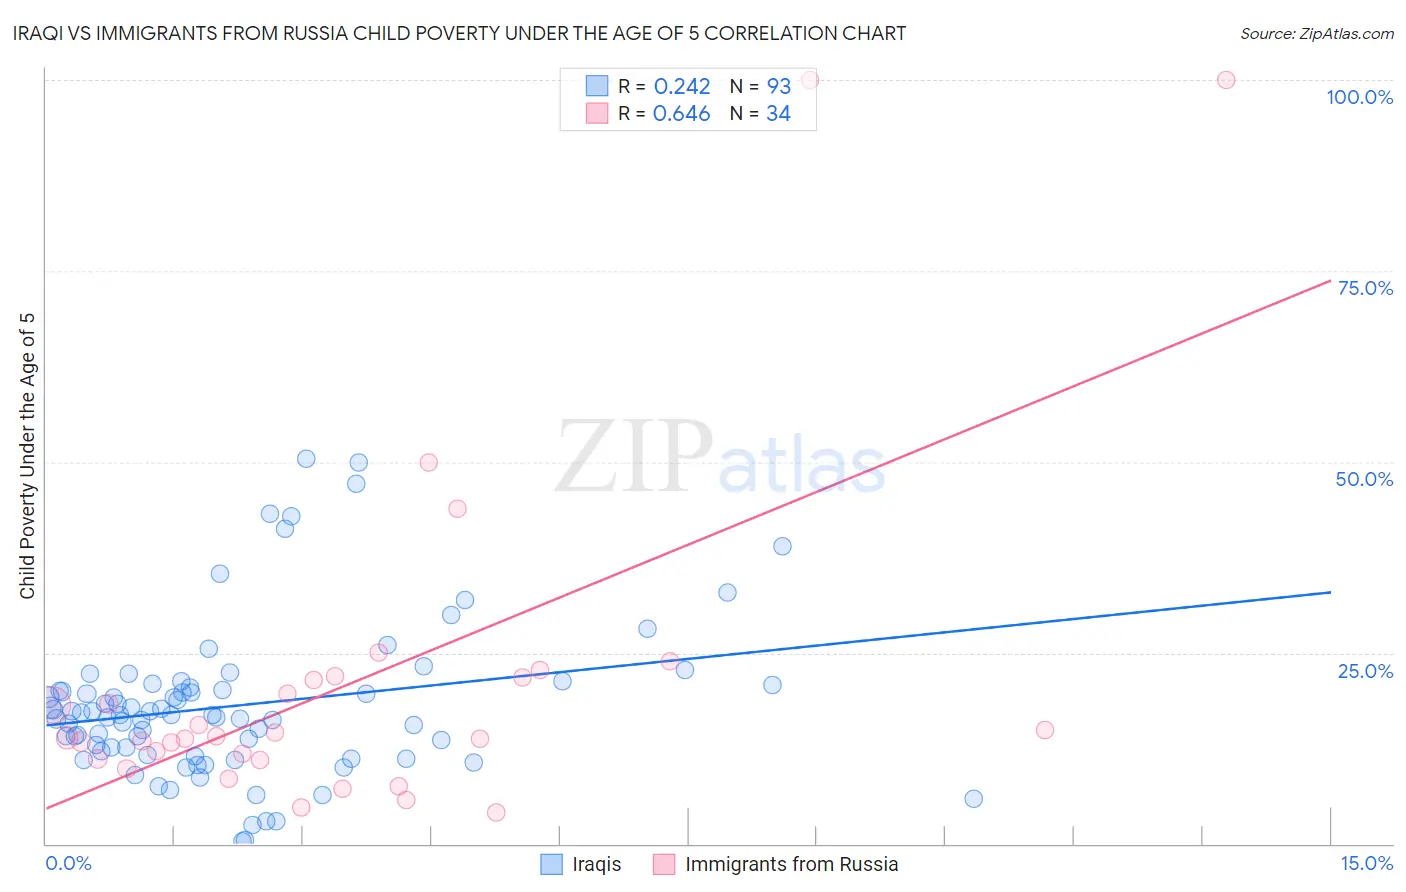 Iraqi vs Immigrants from Russia Child Poverty Under the Age of 5